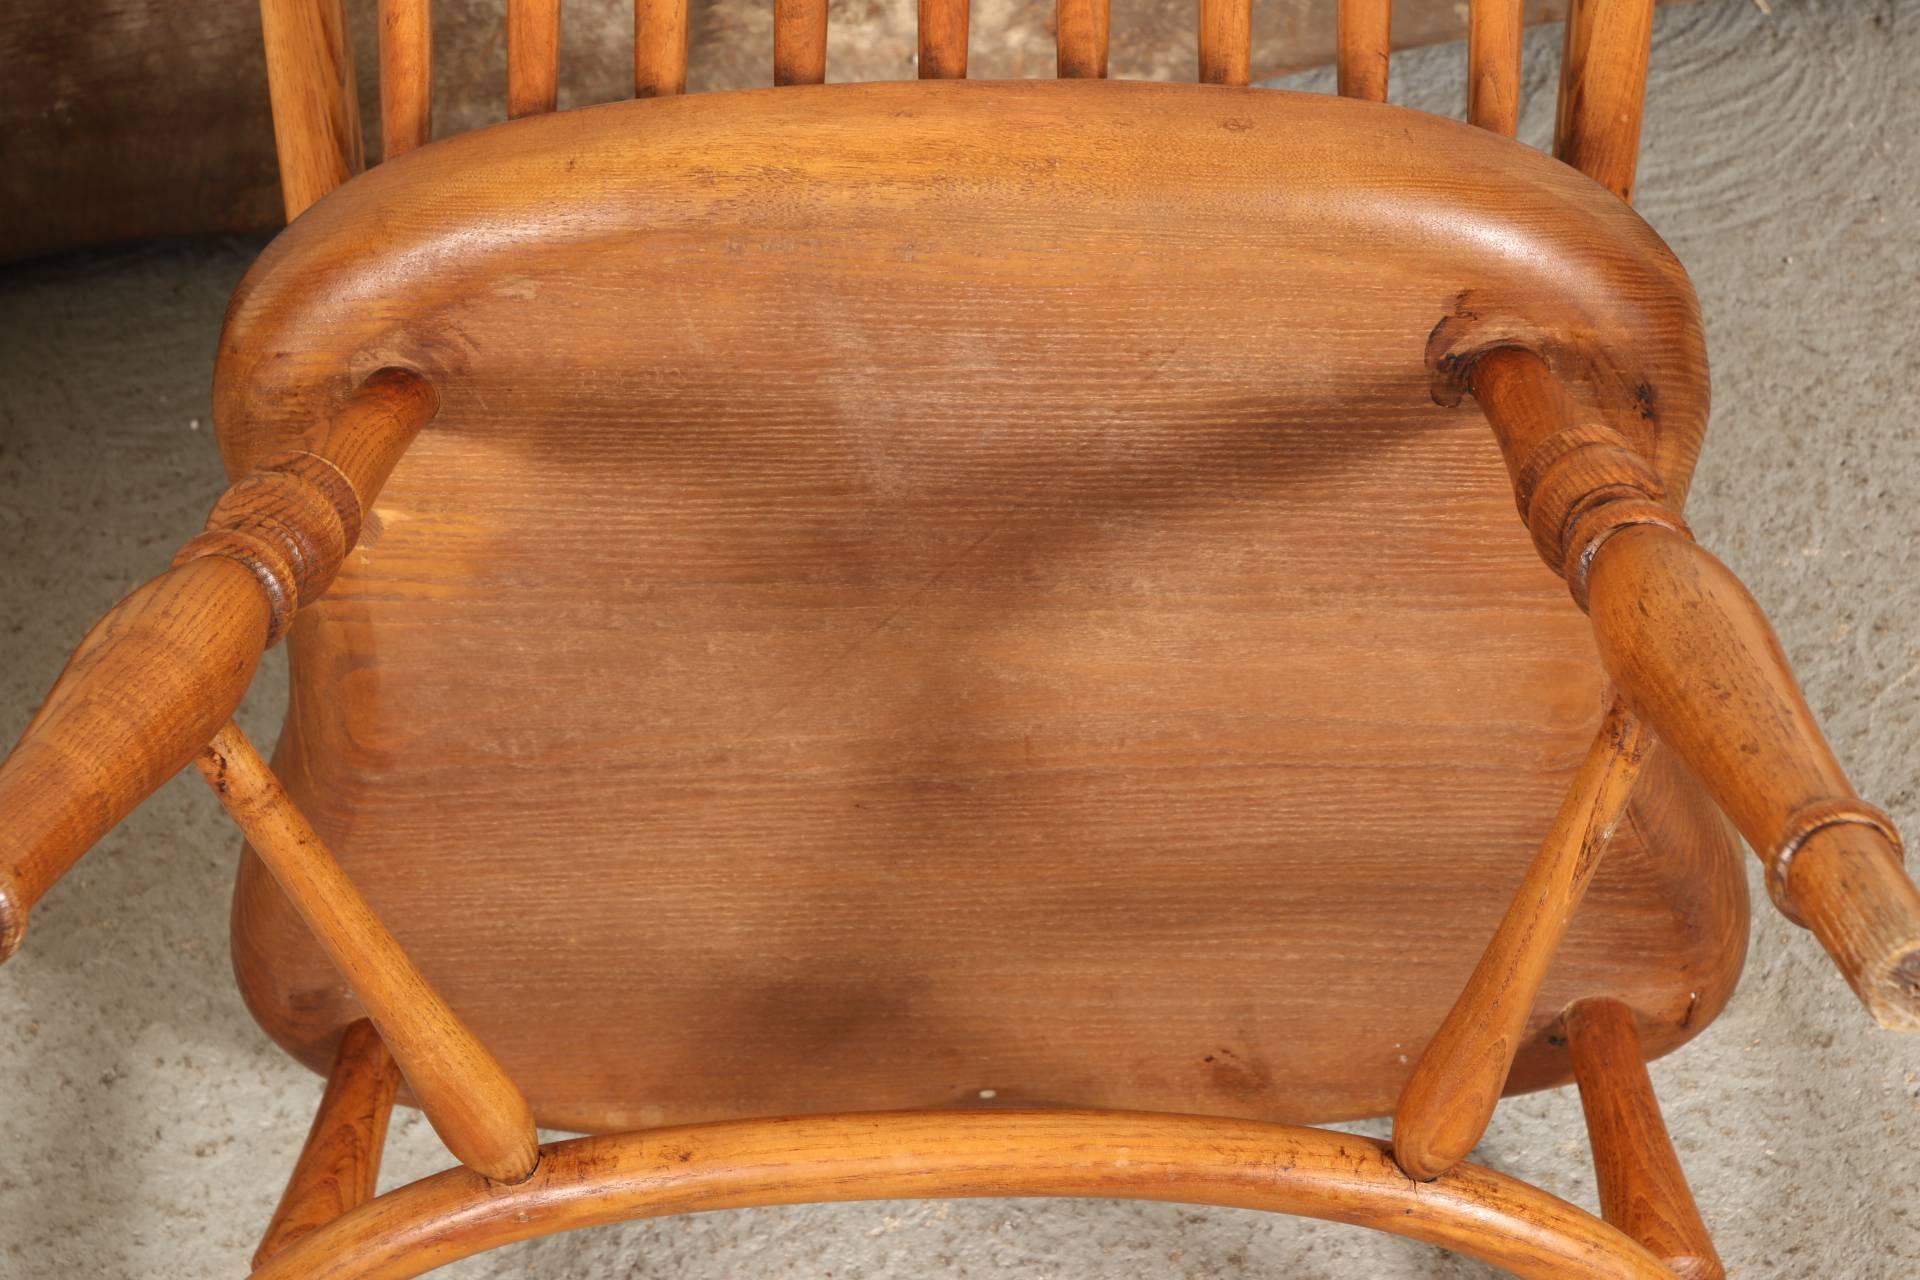 Oak with hoop shaped back frame with spindles, shaped seats, splayed and turned legs and an incurved front stretcher with two turned supports. One chair with a loose hoop attachment to the seat. Seat height is 18.5 inches.
Condition: slight wear to